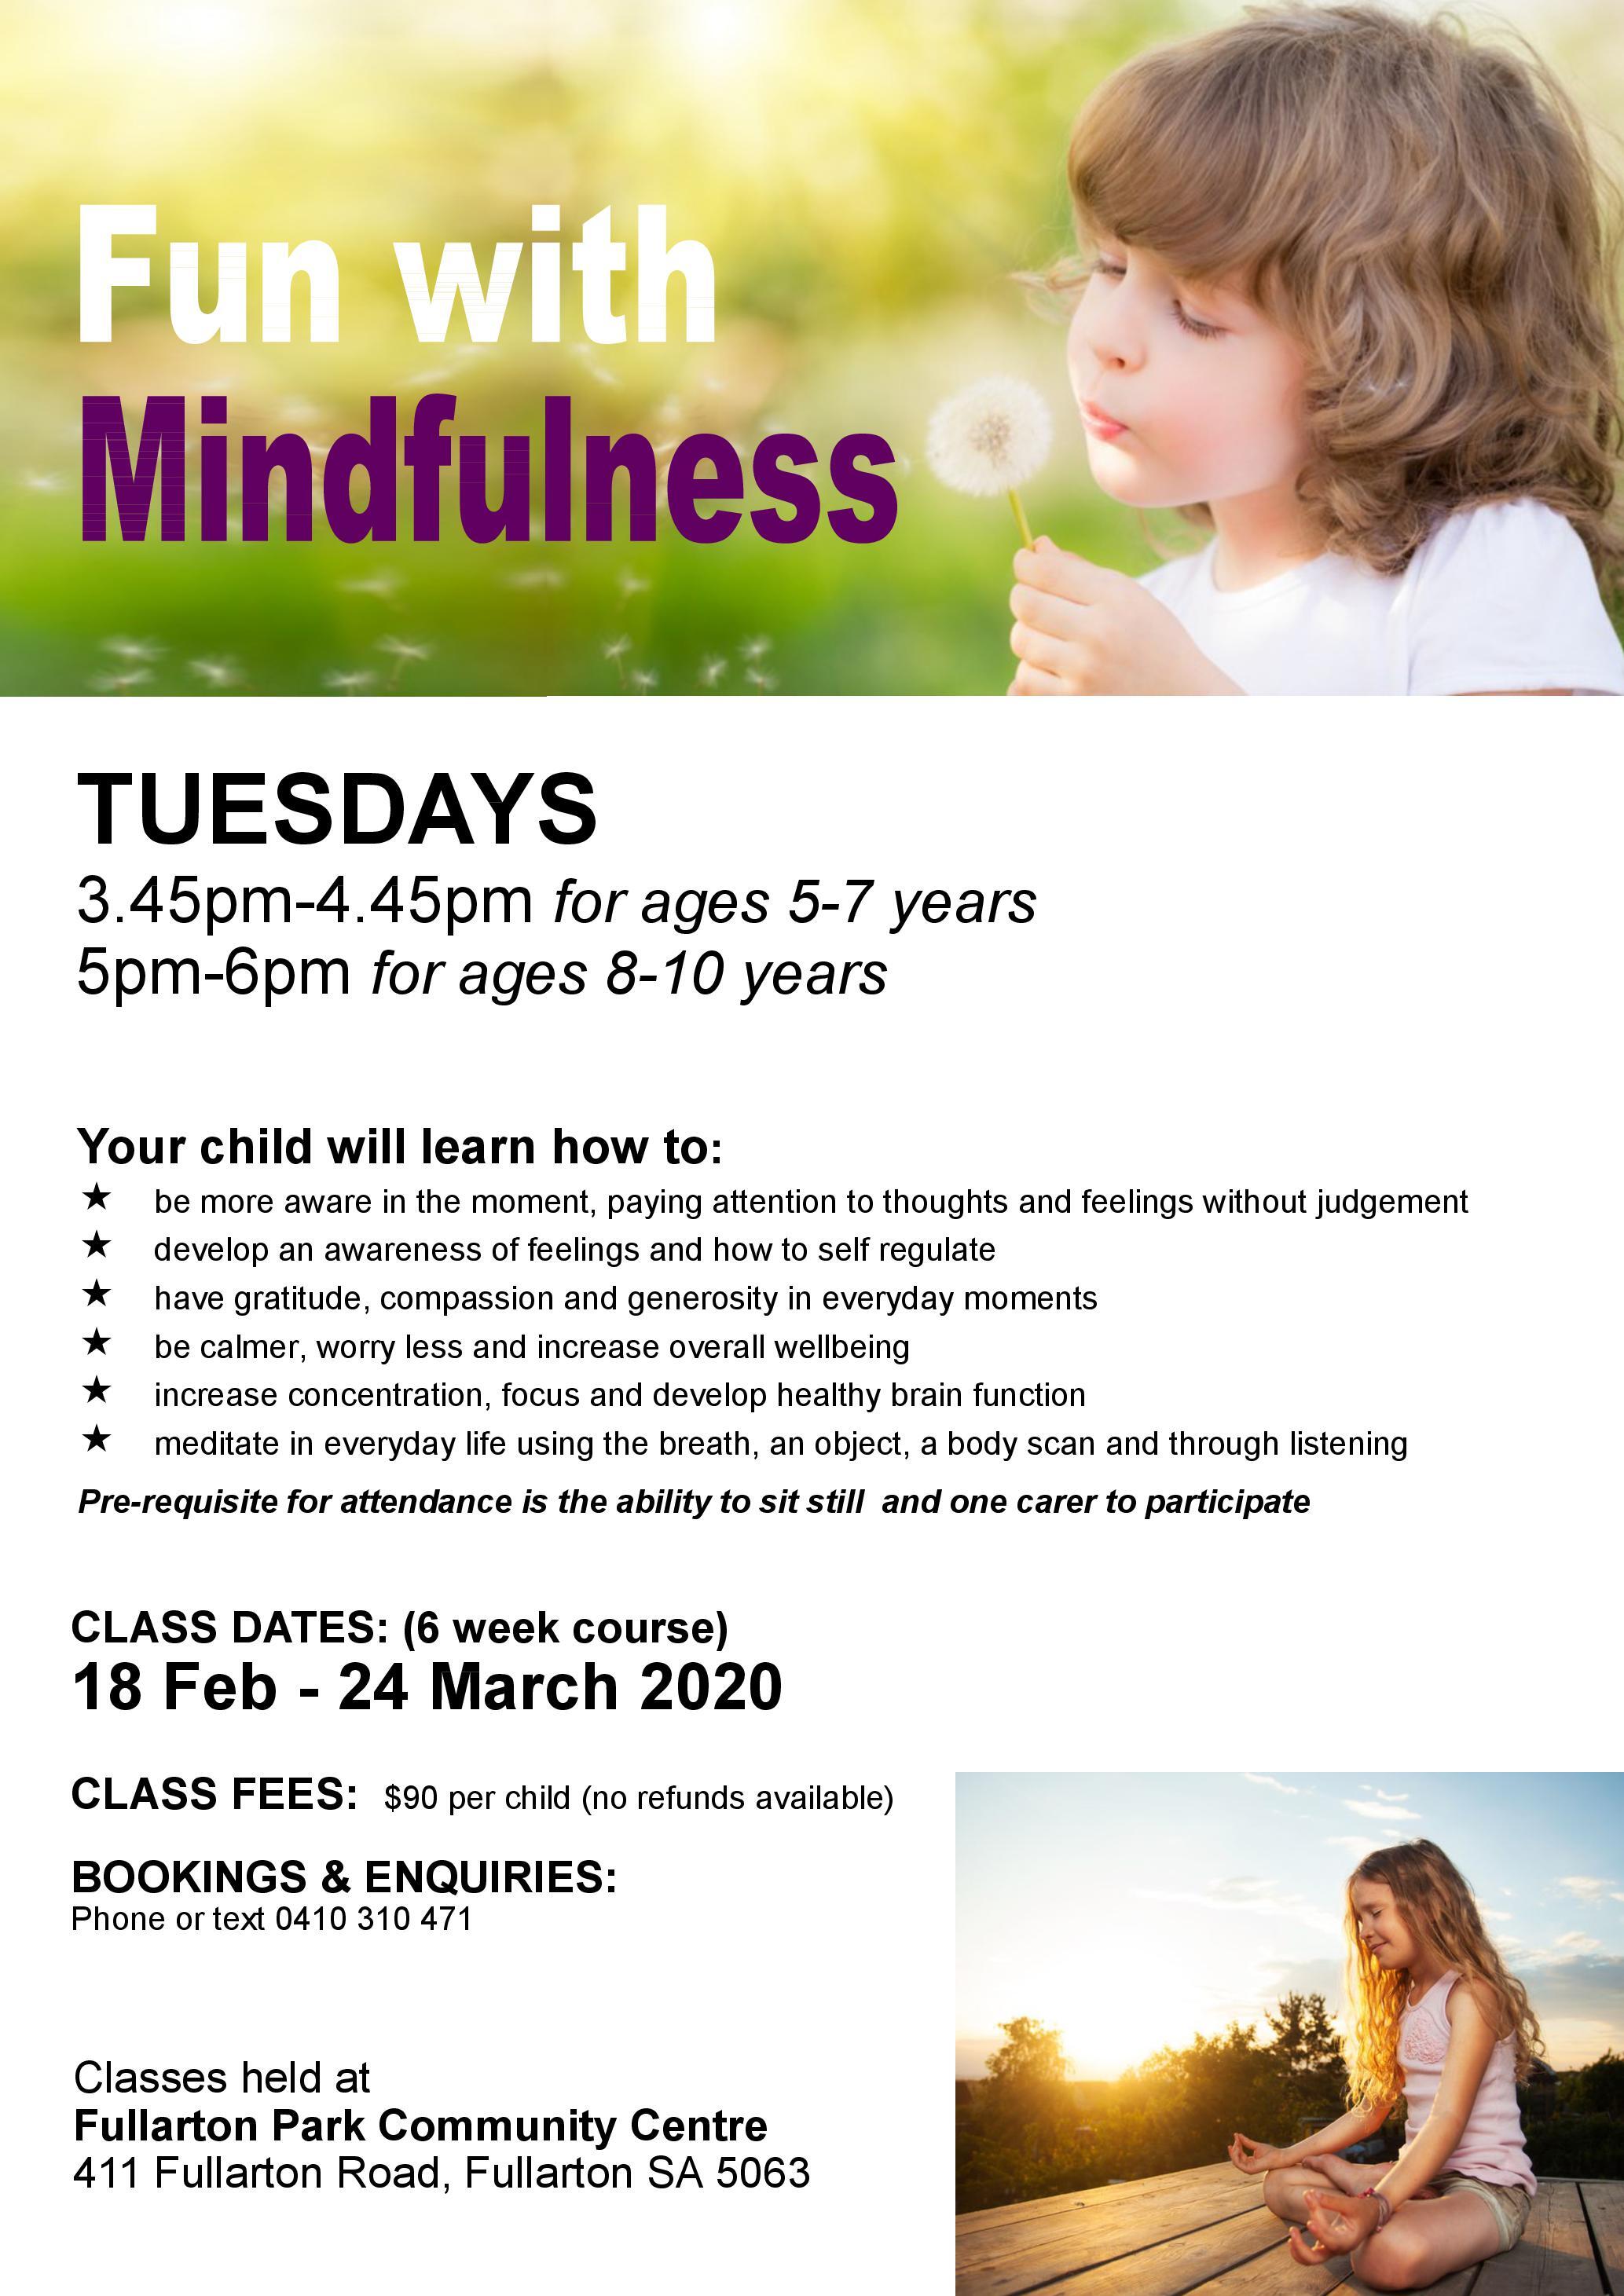 Fun with mindfulness course